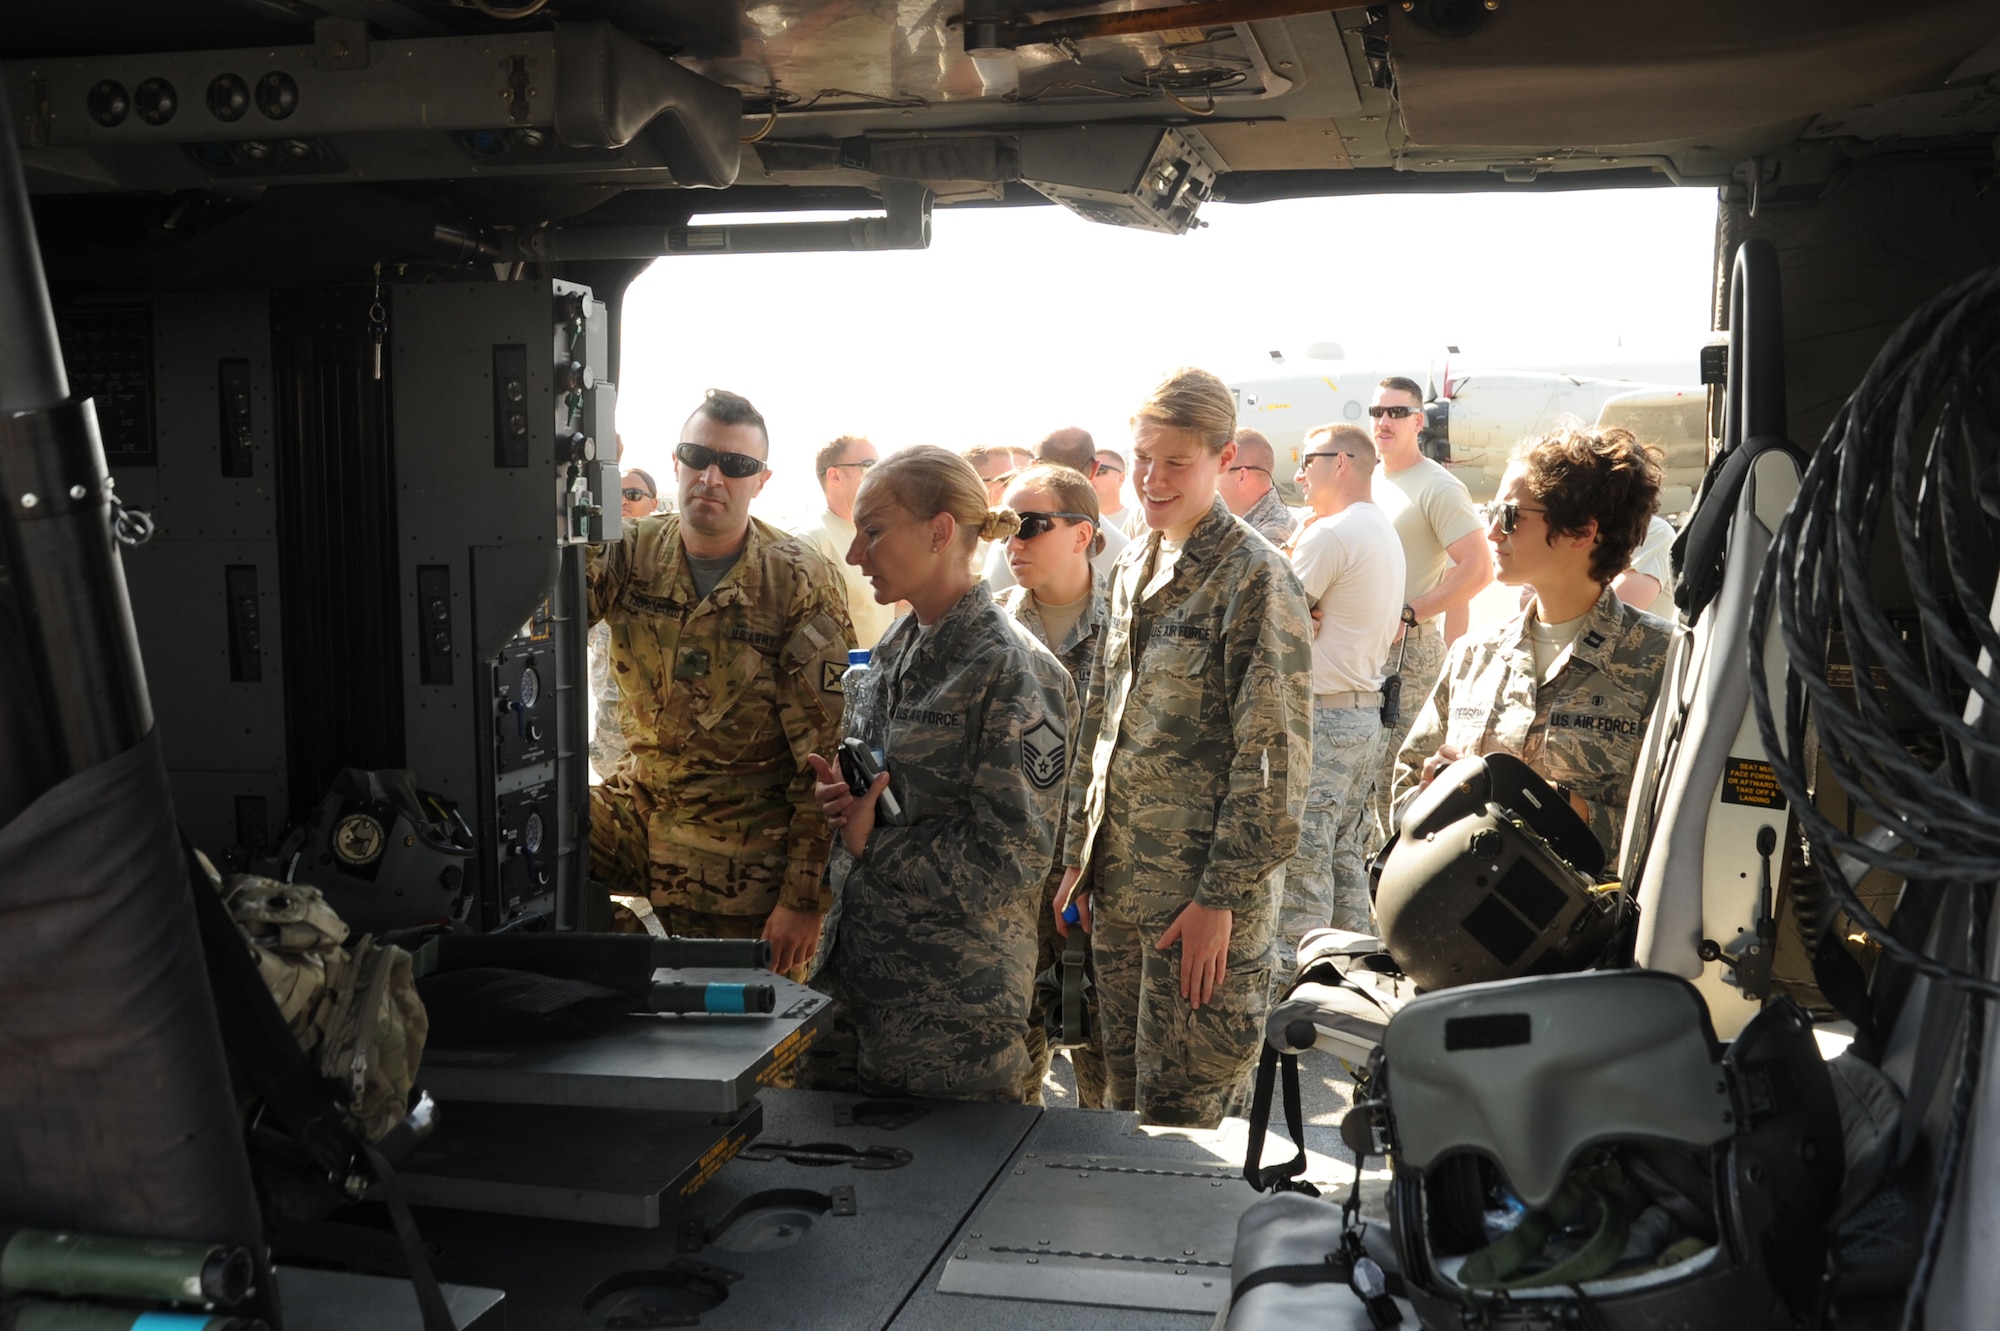 Airmen from the 386th Expeditionary Medical Group look inside an HH-60G Pave Hawk helicopter prior to medical evacuation training Oct. 14, 2016 at an undisclosed location in Southwest Asia. The training gave the 386 EMDG Airmen the opportunity to “hot load” a simulated patient with the rotors running on the aircraft. (U.S. Air Force photo/Senior Airman Zachary Kee)